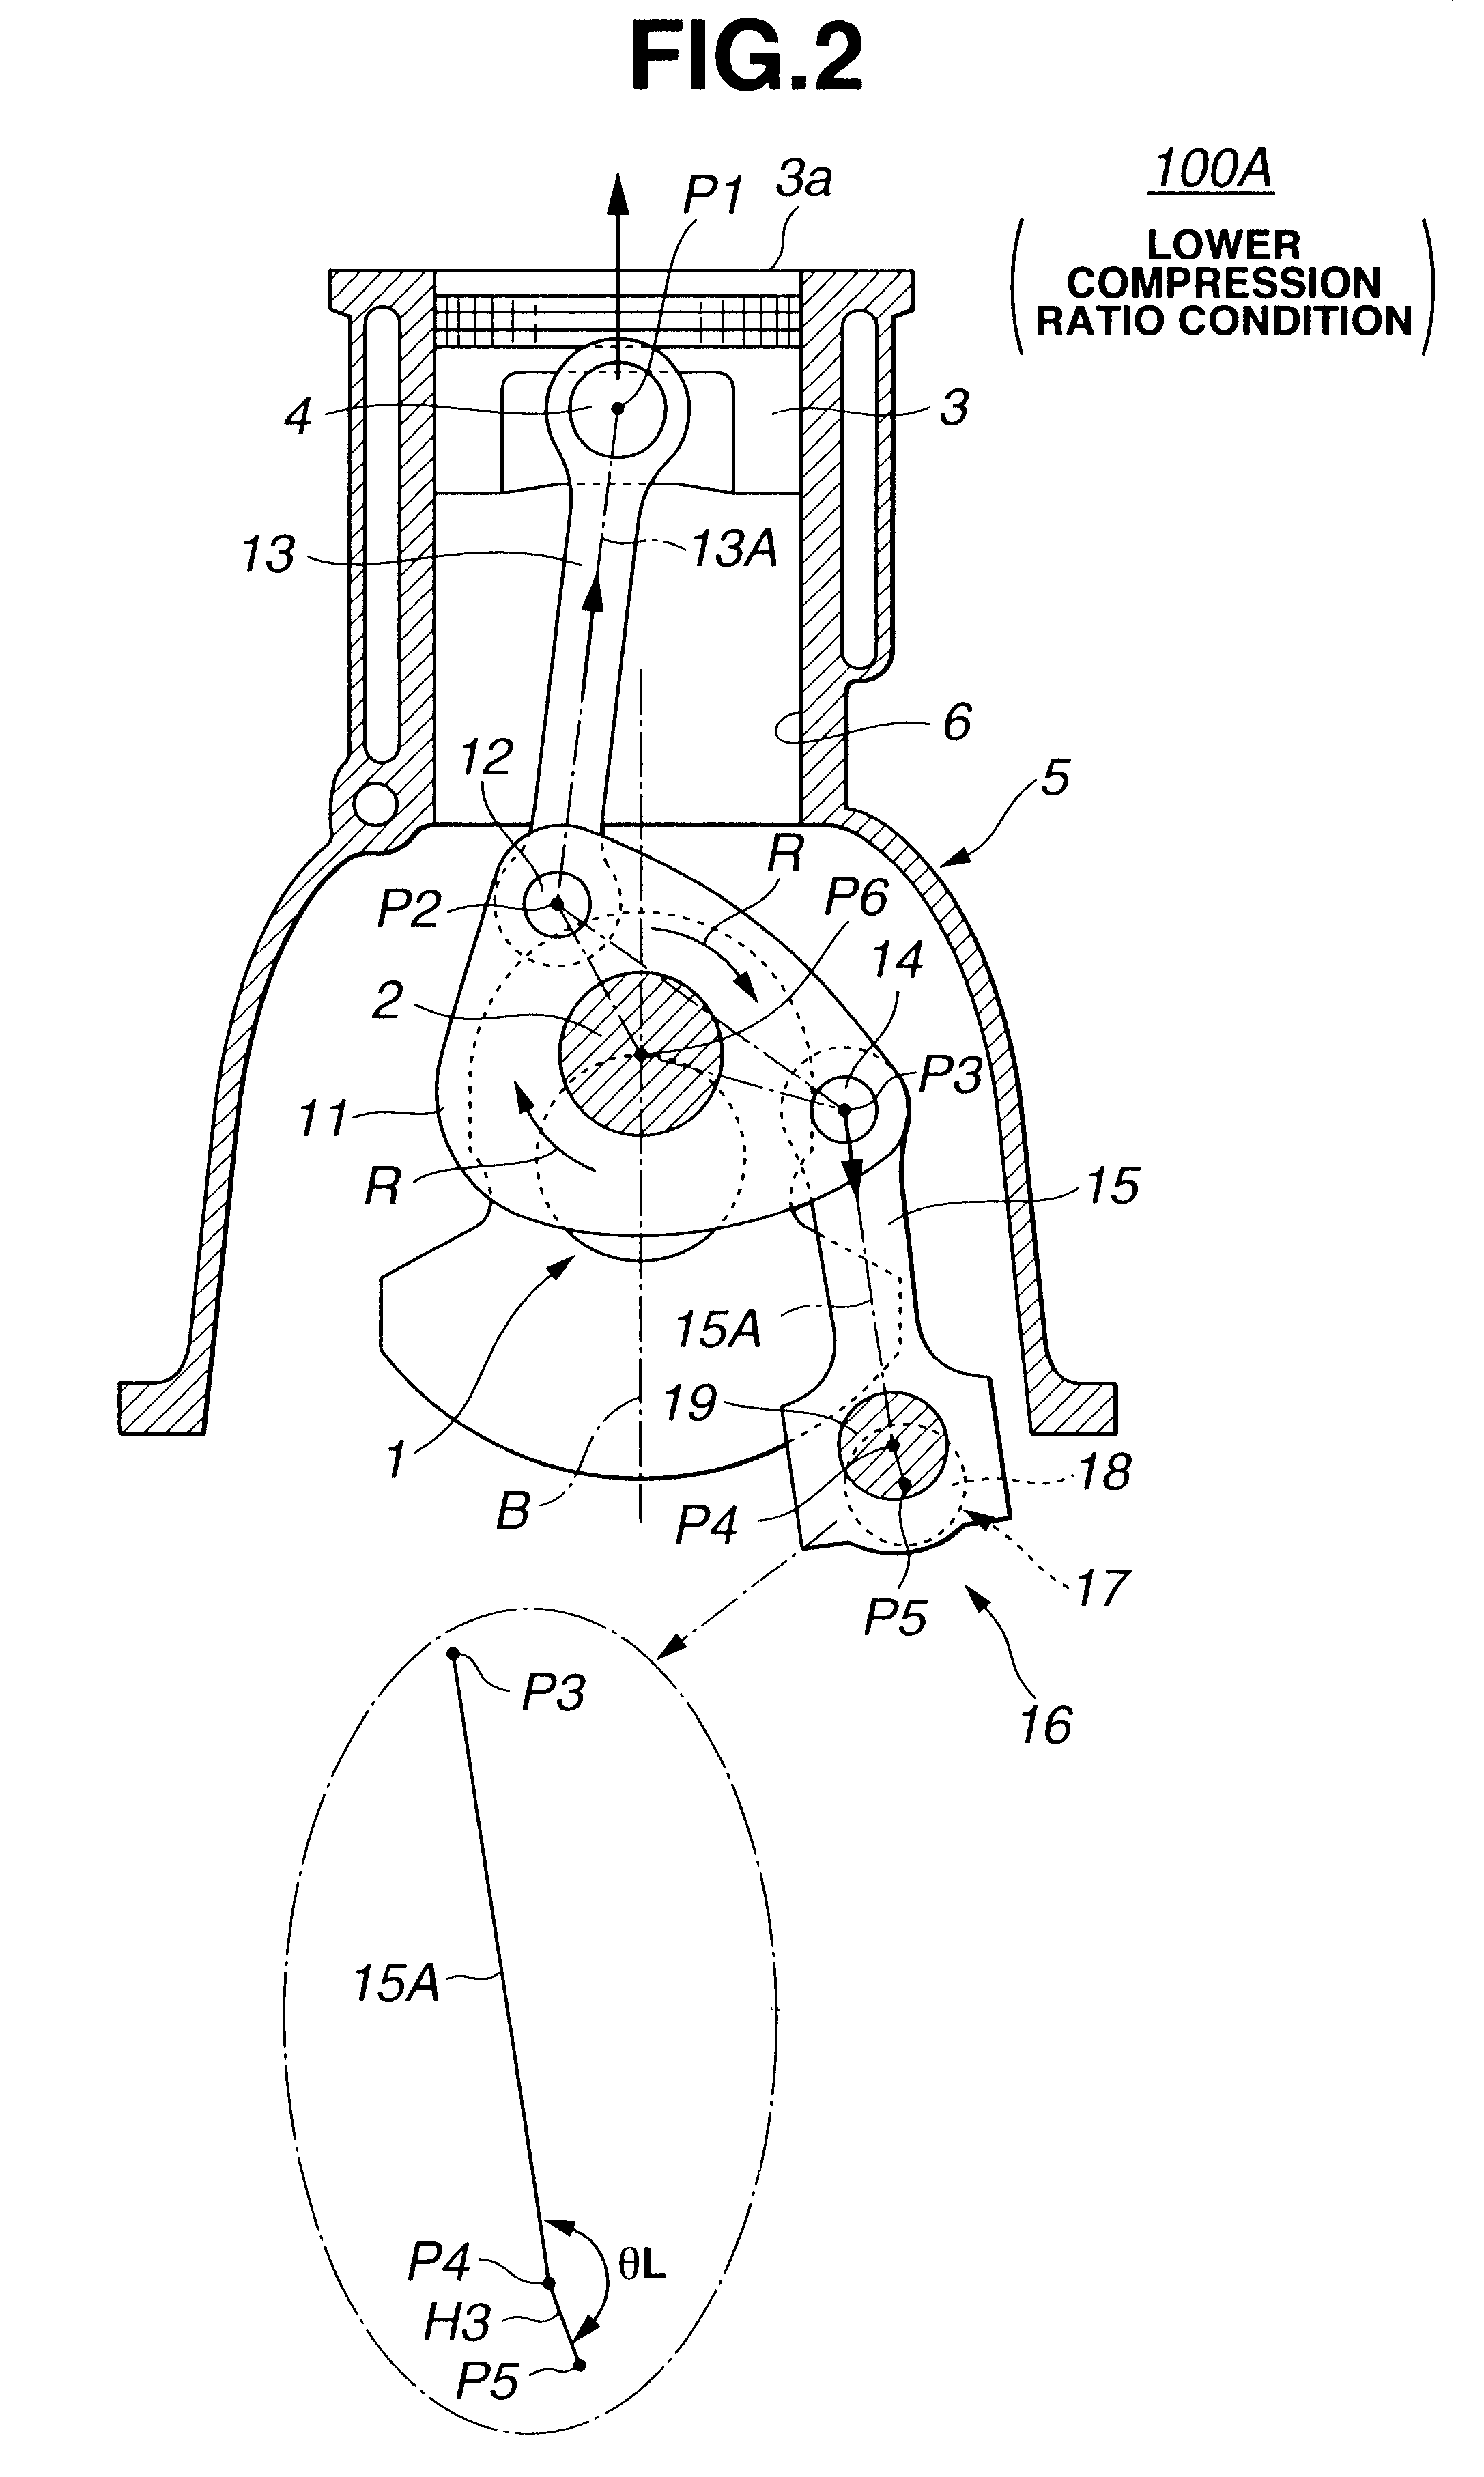 Piston control mechanism of reciprocating internal combustion engine of variable compression ratio type